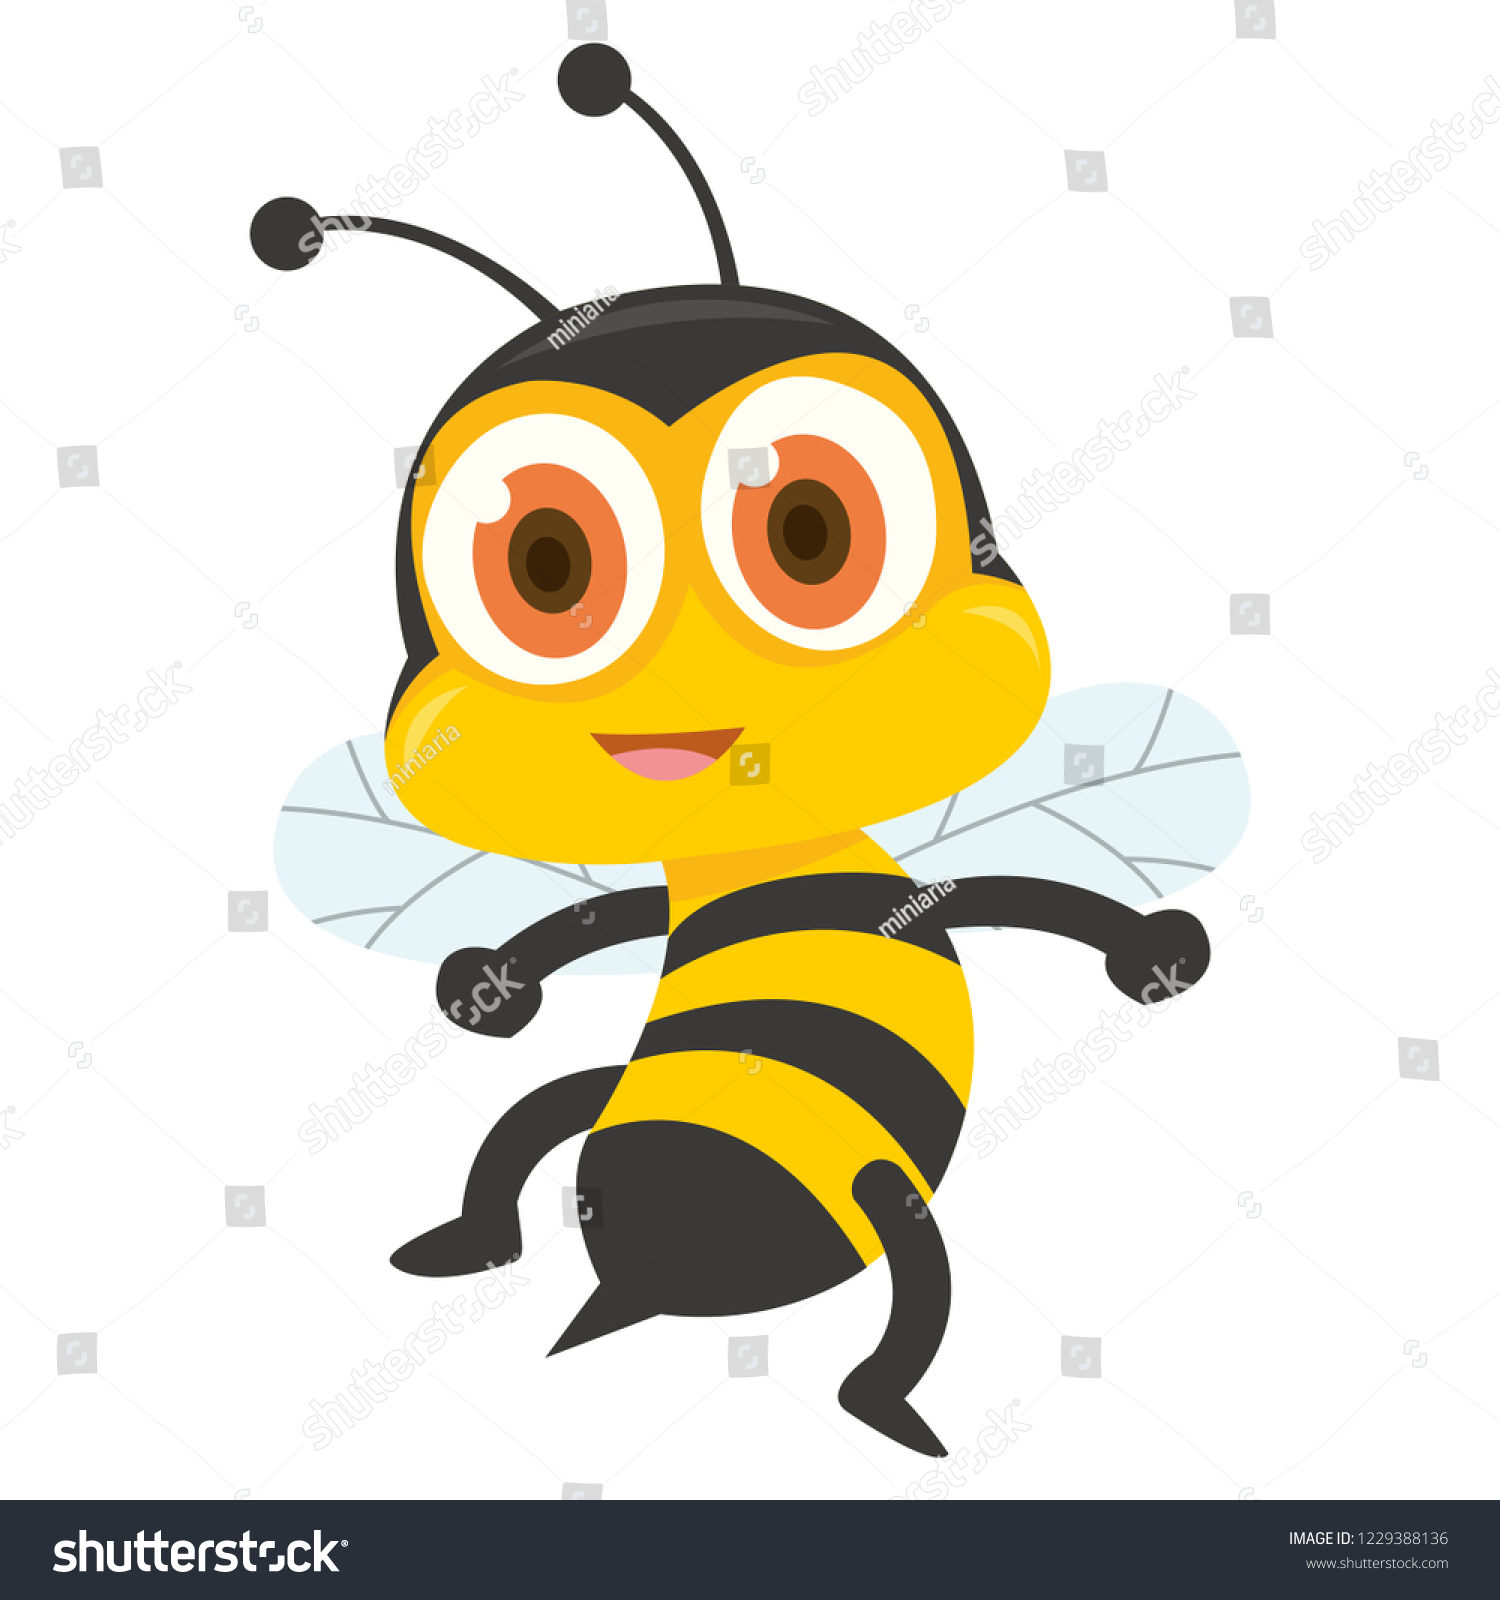 Cartoon Yellow Bee Showing His Sting Stock Vector Royalty Free 1229388136 4978